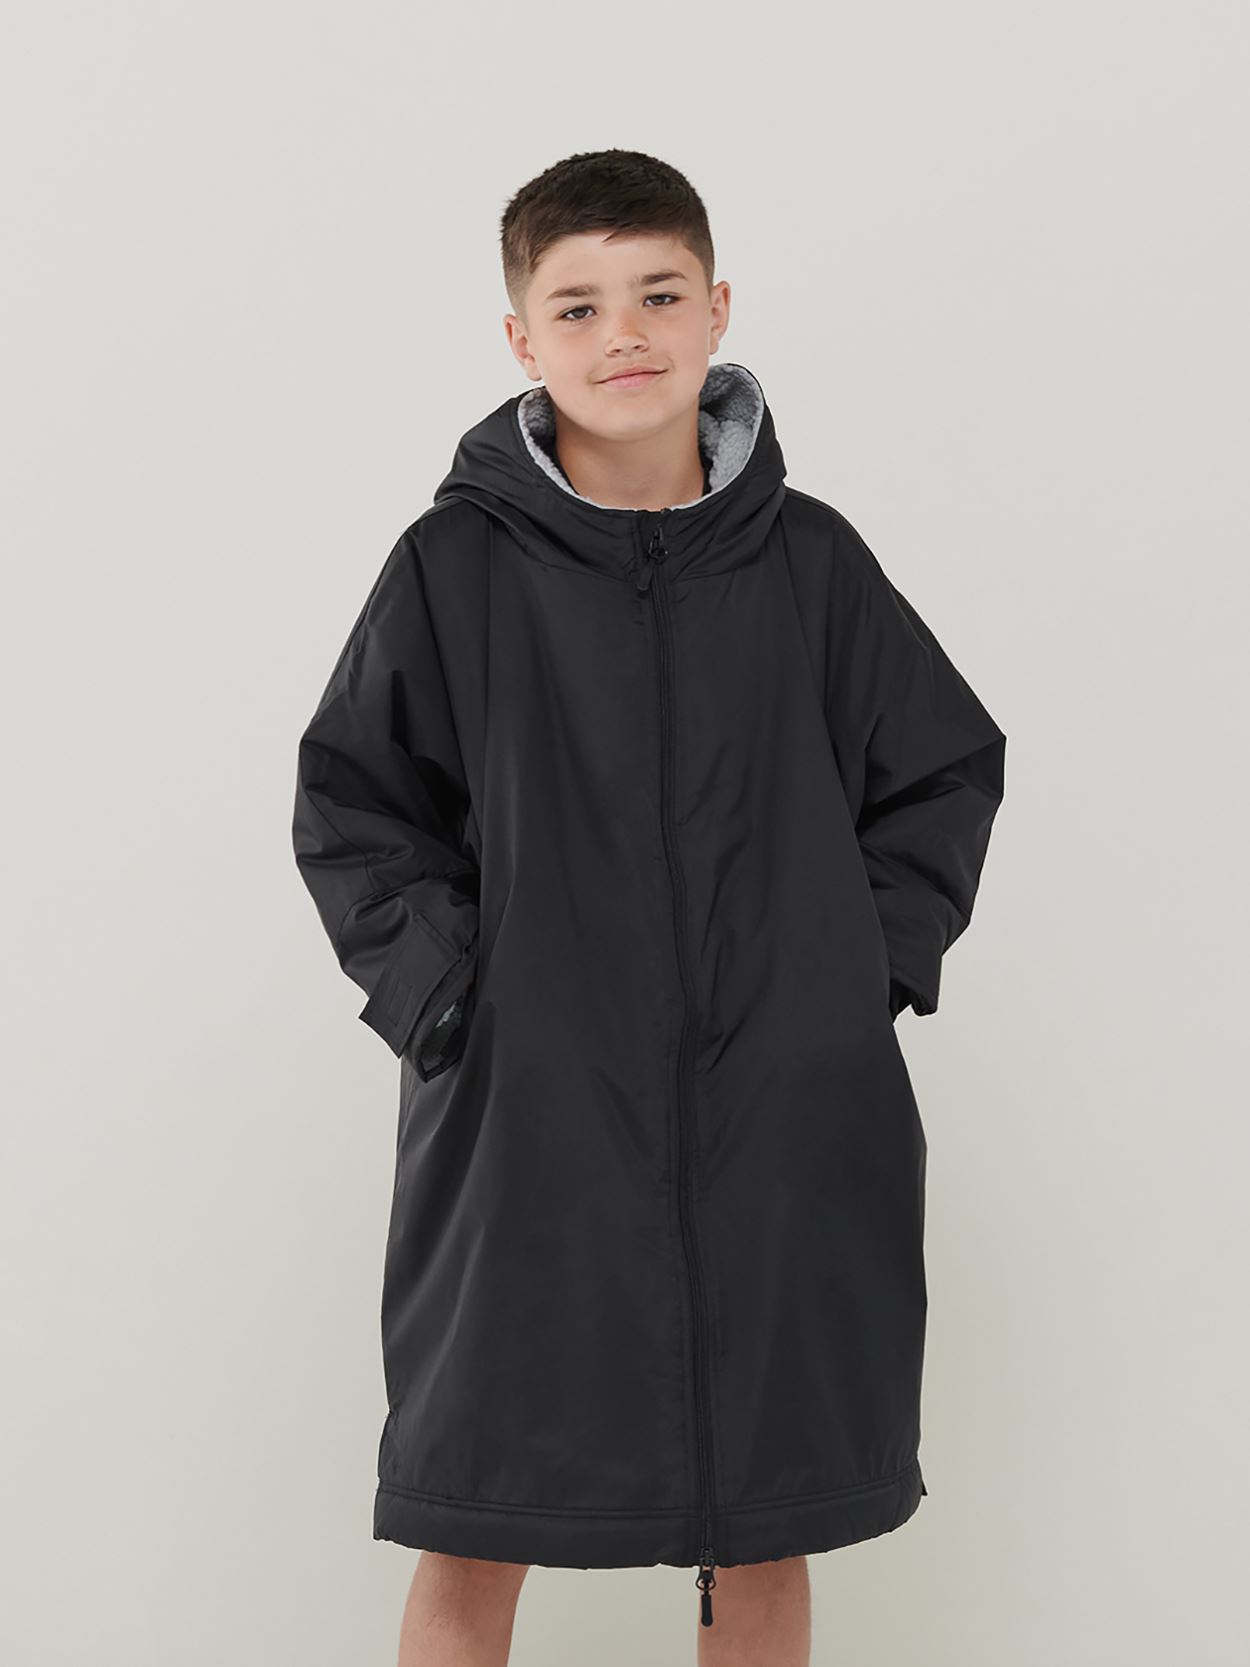 LV691 Kids All Weather Robe  Image 1